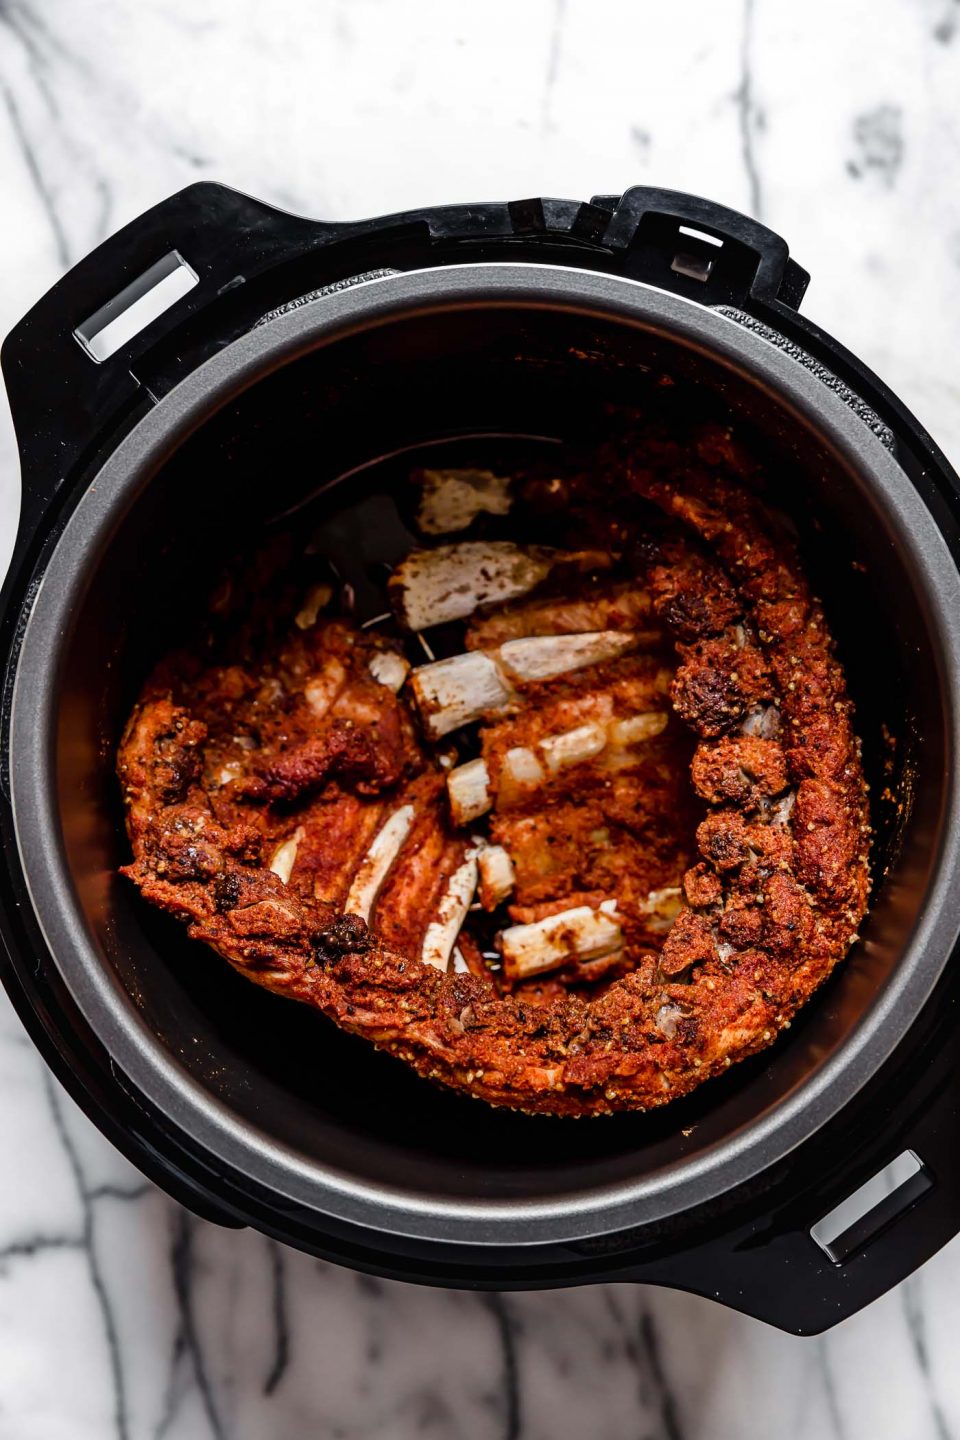 Seasoned ribs shown in electric pressure cooker after cooking.